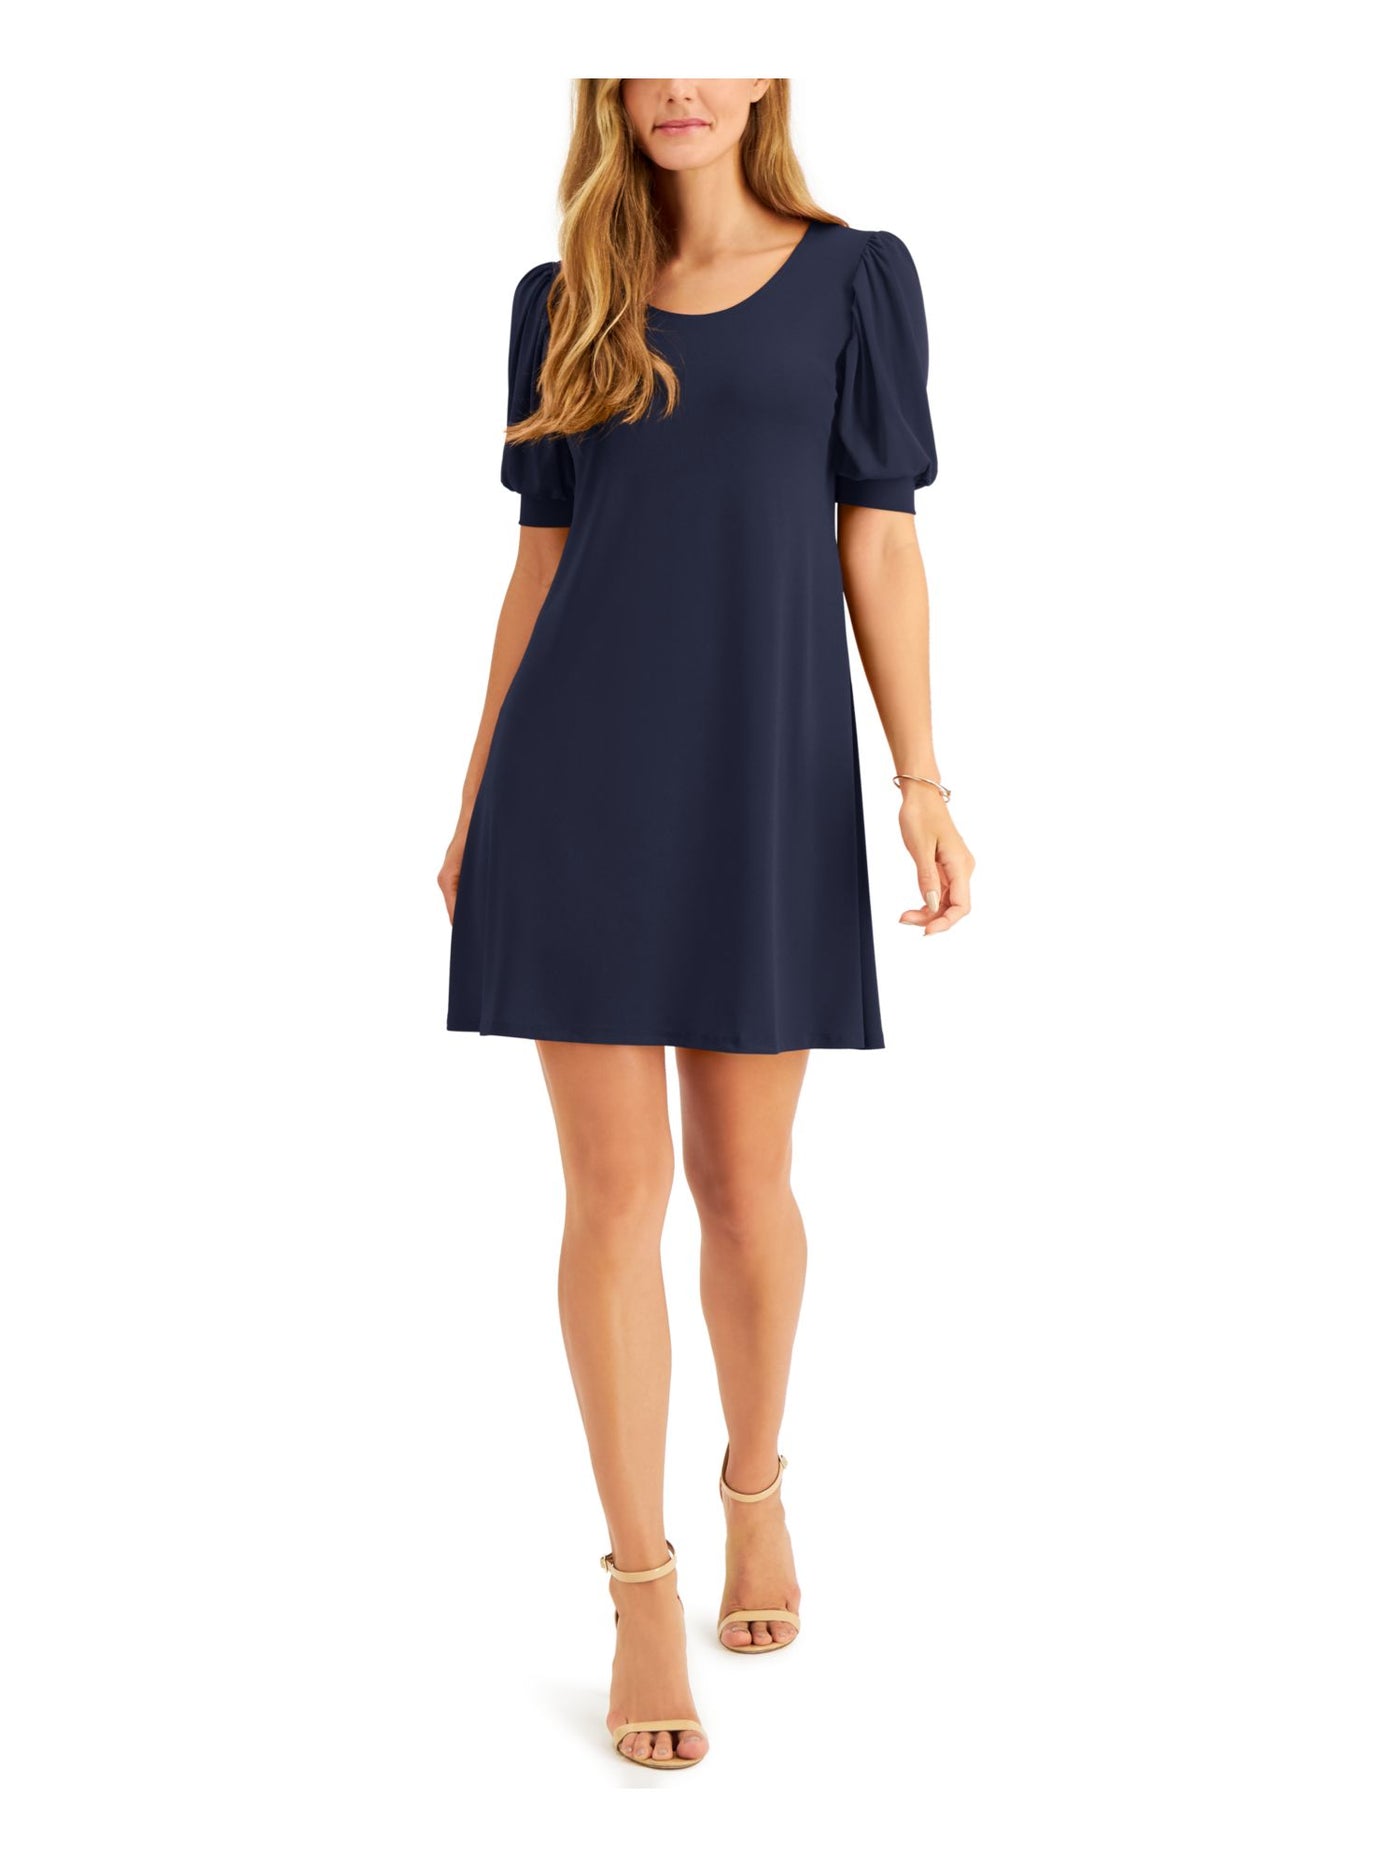 MSK PETITES Womens Navy Stretch Gathered Textured Pouf Sleeve Scoop Neck Short Party Shift Dress Petites PL